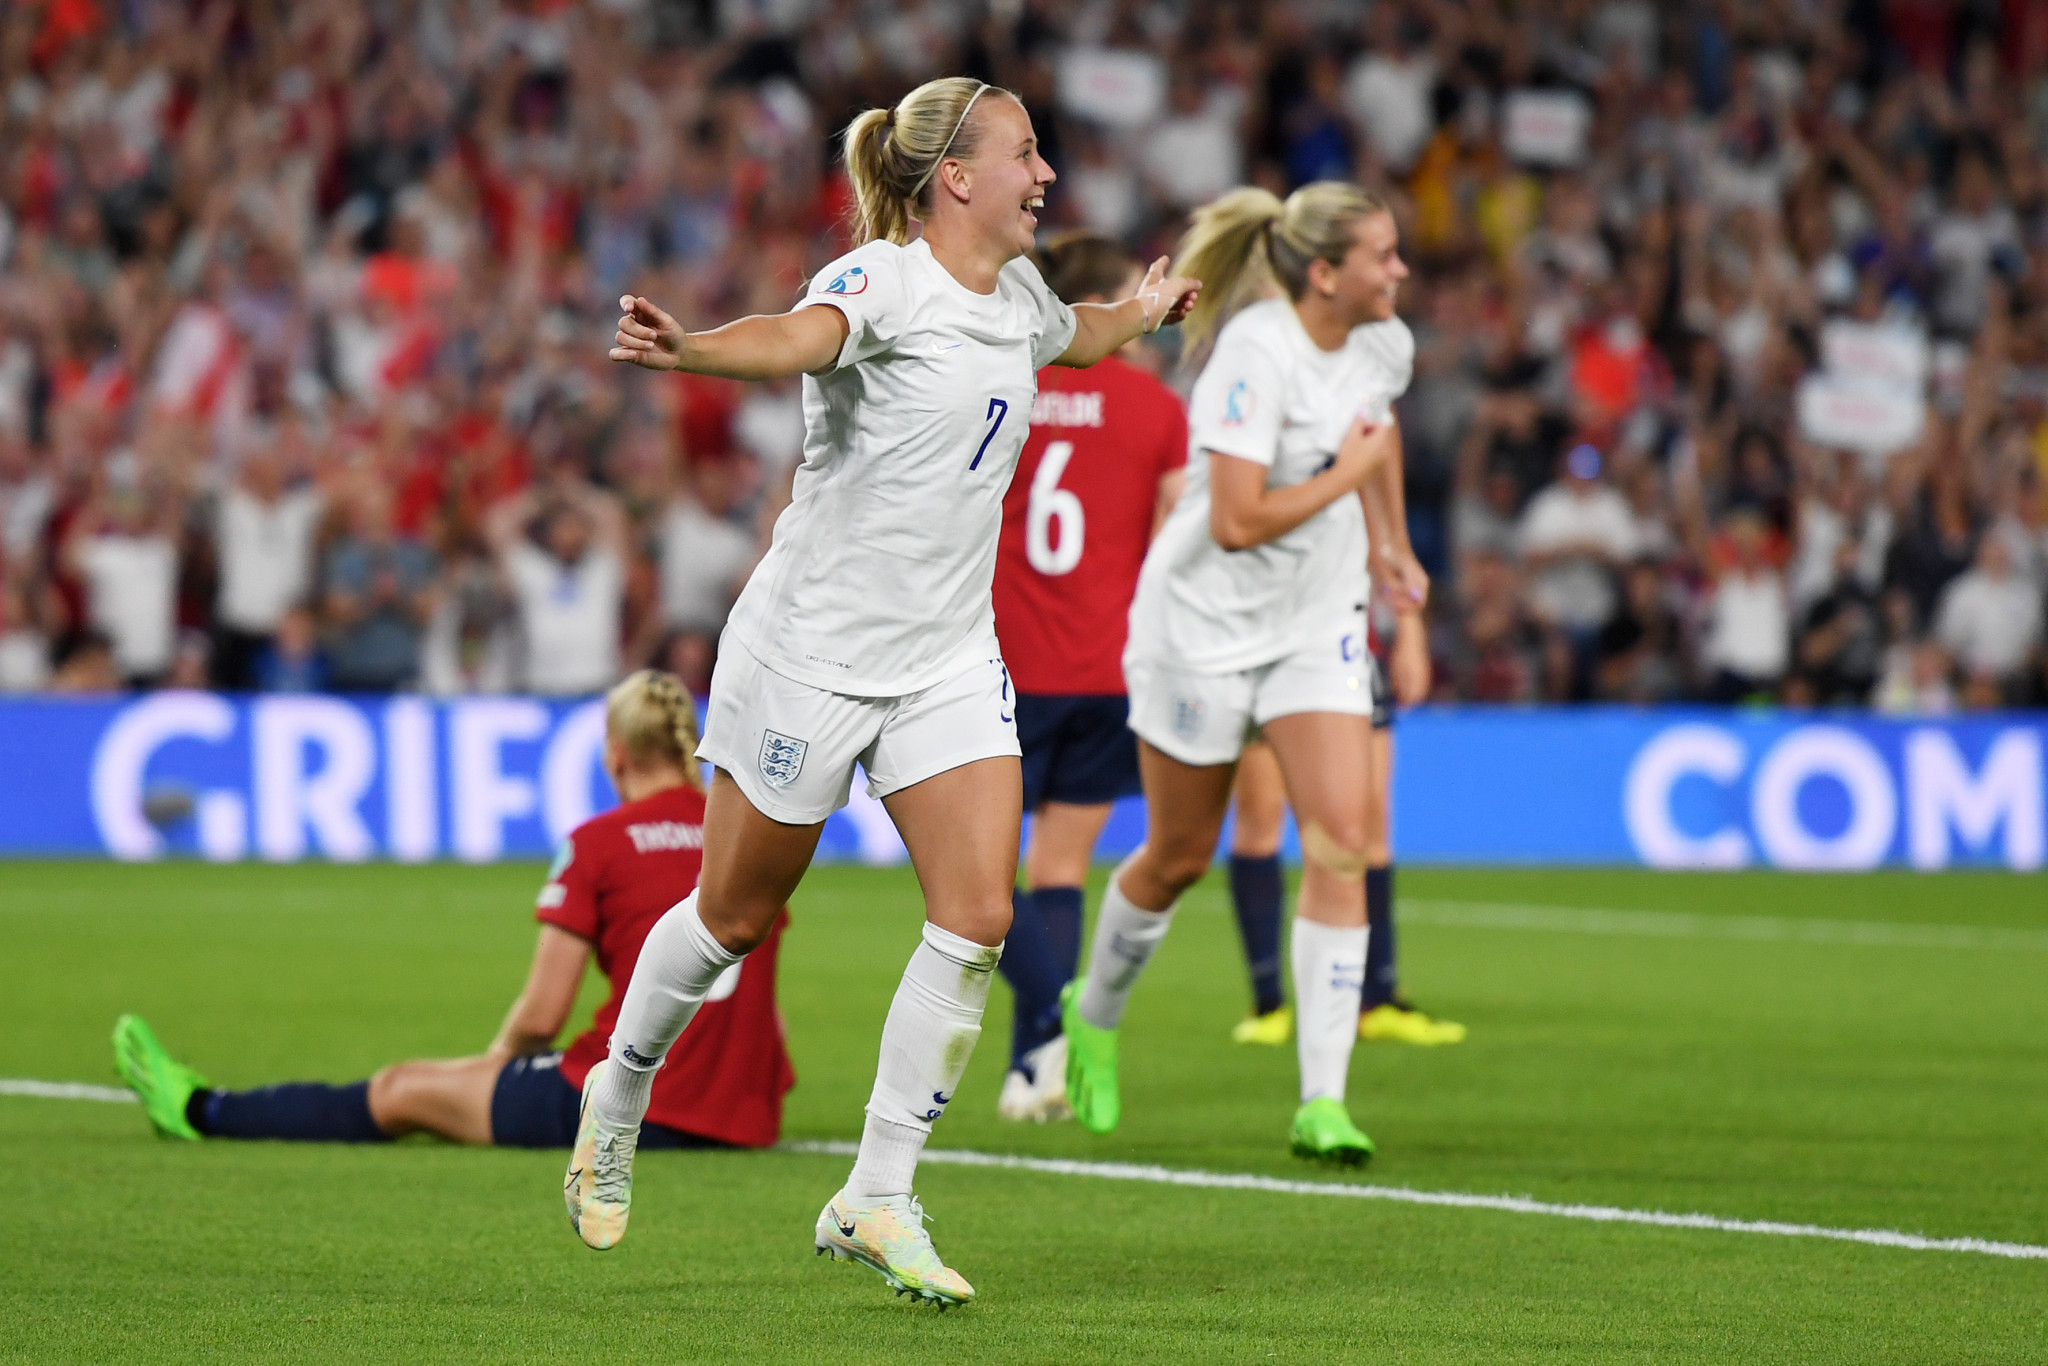 Beth Meath recorded a hat-trick against Norway in a historic win at UEFA Women's EURO 2022 ©Getty Images